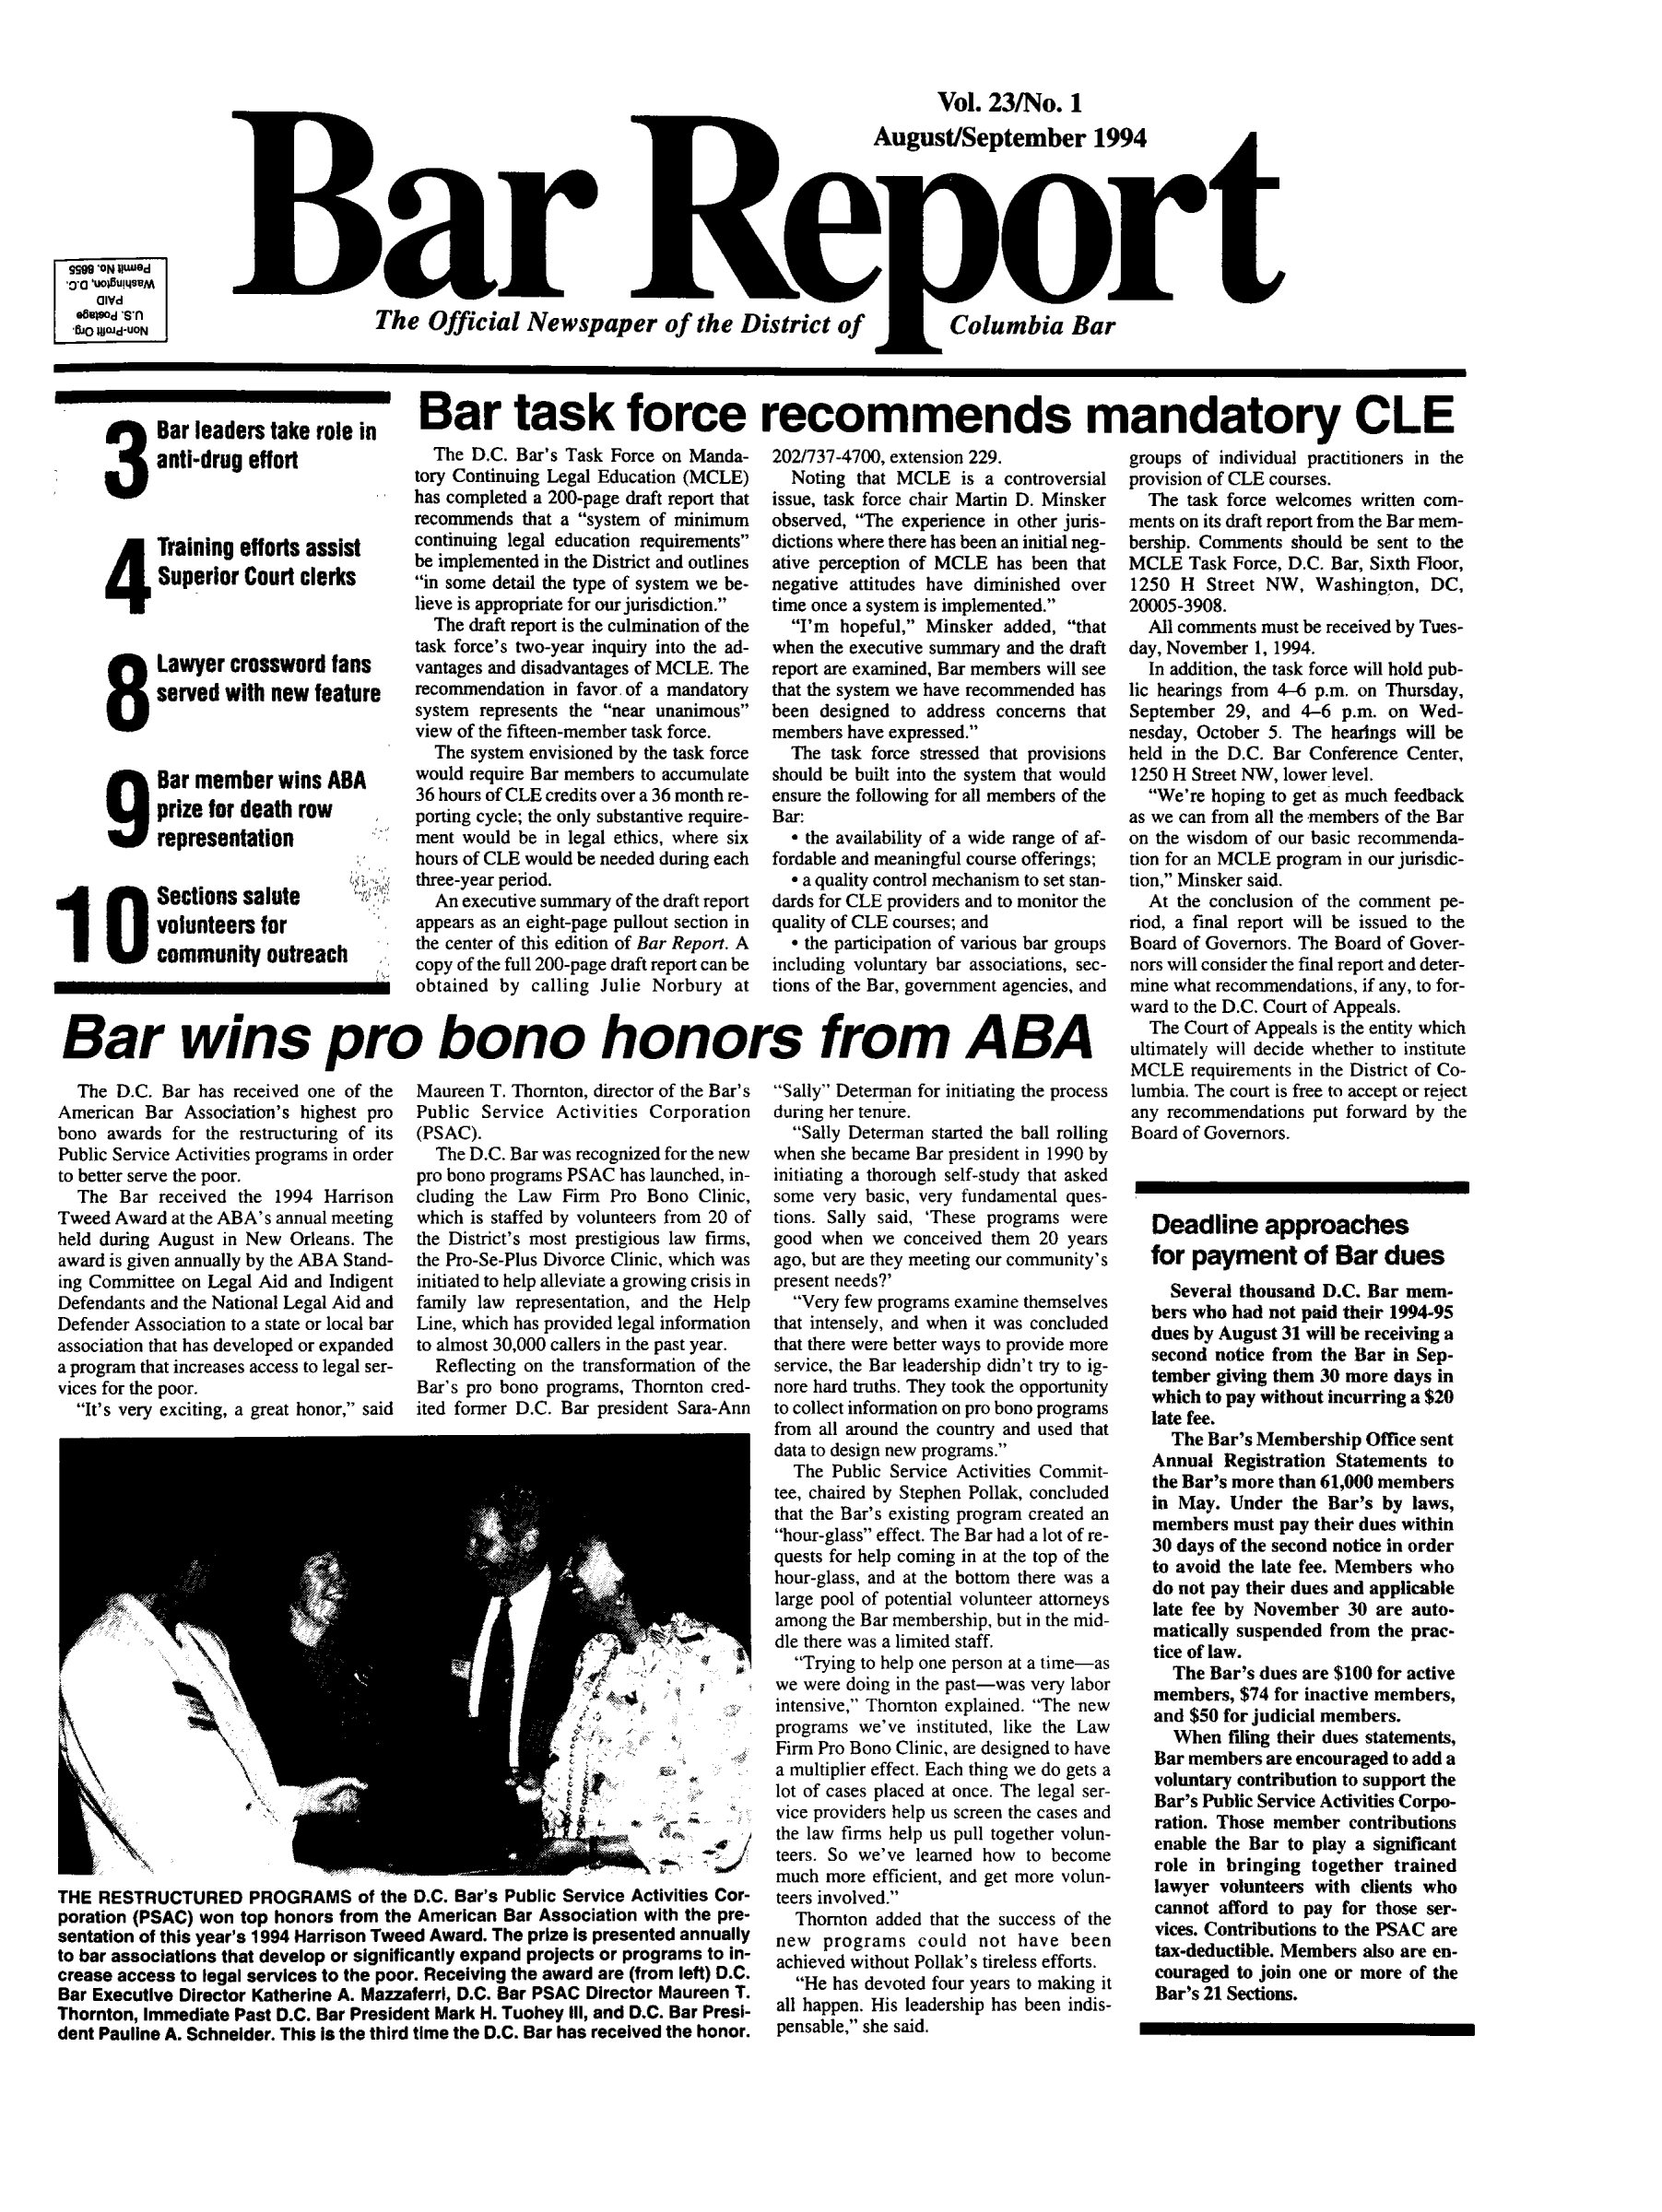 handle is hein.barjournals/breport0025 and id is 1 raw text is: Vol. 23/No. 1
August/September 1994
Bar R or t
OlYd
The Official Newspaper of the District of  Columbia Bar
'Wo a~d.UON
Bar leaderstake role in  Bar task force recommends mandatory CL

anti-drug effort
Training efforts assist
Superior Court clerks
Lawyer crossword fans
served with new feature
Bar member wins ABA
prize for death row
representation
I O Sections salute
volunteers for
community outreach

The D.C. Bar's Task Force on Manda-
tory Continuing Legal Education (MCLE)
has completed a 200-page draft report that
recommends that a system of minimum
continuing legal education requirements
be implemented in the District and outlines
in some detail the type of system we be-
lieve is appropriate for our jurisdiction.
The draft report is the culmination of the
task force's two-year inquiry into the ad-
vantages and disadvantages of MCLE. The
recommendation in favor of a mandatory
system represents the near unanimous
view of the fifteen-member task force.
The system envisioned by the task force
would require Bar members to accumulate
36 hours of CLE credits over a 36 month re-
porting cycle; the only substantive require-
ment would be in legal ethics, where six
hours of CLE would be needed during each
three-year period.
An executive summary of the draft report
appears as an eight-page pullout section in
the center of this edition of Bar Report. A
copy of the full 200-page draft report can be
obtained by calling Julie Norbury at

202/737-4700, extension 229.
Noting that MCLE is a controversial
issue, task force chair Martin D. Minsker
observed, The experience in other juris-
dictions where there has been an initial neg-
ative perception of MCLE has been that
negative attitudes have diminished over
time once a system is implemented.
I'm hopeful, Minsker added, that
when the executive summary and the draft
report are examined, Bar members will see
that the system we have recommended has
been designed to address concerns that
members have expressed.
The task force stressed that provisions
should be built into the system that would
ensure the following for all members of the
Bar:
* the availability of a wide range of af-
fordable and meaningful course offerings;
* a quality control mechanism to set stan-
dards for CLE providers and to monitor the
quality of CLE courses; and
* the participation of various bar groups
including voluntary bar associations, sec-
tions of the Bar, government agencies, and

Bar wins pro bono honors from ABA

The D.C. Bar has received one of the
American Bar Association's highest pro
bono awards for the restructuring of its
Public Service Activities programs in order
to better serve the poor.
The Bar received the 1994 Harrison
Tweed Award at the ABA's annual meeting
held during August in New Orleans. The
award is given annually by the ABA Stand-
ing Committee on Legal Aid and Indigent
Defendants and the National Legal Aid and
Defender Association to a state or local bar
association that has developed or expanded
a program that increases access to legal ser-
vices for the poor.
It's very exciting, a great honor, said

Maureen T. Thornton, director of the Bar's
Public Service Activities Corporation
(PSAC).
The D.C. Bar was recognized for the new
pro bono programs PSAC has launched, in-
cluding the Law Firm Pro Bono Clinic,
which is staffed by volunteers from 20 of
the District's most prestigious law firms,
the Pro-Se-Plus Divorce Clinic, which was
initiated to help alleviate a growing crisis in
family law representation, and the Help
Line, which has provided legal information
to almost 30,000 callers in the past year.
Reflecting on the transformation of the
Bar's pro bono programs, Thornton cred-
ited former D.C. Bar president Sara-Ann

THE RESTRUCTURED PROGRAMS of the D.C. Bar's Public Service Activities Cor-
poration (PSAC) won top honors from the American Bar Association with the pre-
sentation of this year's 1994 Harrison Tweed Award. The prize Is presented annually
to bar associations that develop or significantly expand projects or programs to in-
crease access to legal services to the poor. Receiving the award are (from left) D.C.
Bar Executive Director Katherine A. Mazzaferri, D.C. Bar PSAC Director Maureen T.
Thornton, immediate Past D.C. Bar President Mark H. Tuohey III, and D.C. Bar Presi-
dent Pauline A. Schneider. This Is the third time the D.C. Bar has received the honor.

Sally Determan for initiating the process
during her tenure.
Sally Determan started the ball rolling
when she became Bar president in 1990 by
initiating a thorough self-study that asked
some very basic, very fundamental ques-
tions. Sally said, 'These programs were
good when we conceived them 20 years
ago, but are they meeting our community's
present needs?'
Very few programs examine themselves
that intensely, and when it was concluded
that there were better ways to provide more
service, the Bar leadership didn't try to ig-
nore hard truths. They took the opportunity
to collect information on pro bono programs
from all around the country and used that
data to design new programs.
The Public Service Activities Commit-
tee, chaired by Stephen Pollak, concluded
that the Bar's existing program created an
hour-glass effect. The Bar had a lot of re-
quests for help coming in at the top of the
hour-glass, and at the bottom there was a
large pool of potential volunteer attorneys
among the Bar membership, but in the mid-
dle there was a limited staff.
Trying to help one person at a time-as
we were doing in the past-was very labor
intensive, Thornton explained. The new
programs we've instituted, like the Law
Firm Pro Bono Clinic, are designed to have
a multiplier effect. Each thing we do gets a
lot of cases placed at once. The legal ser
vice providers help us screen the cases and
the law firms help us pull together volun-
teers. So we've learned how to become
much more efficient, and get more volun-
teers involved.
Thornton added that the success of the
new programs could not have been
achieved without Pollak's tireless efforts.
He has devoted four years to making it
all happen. His leadership has been indis-
pensable, she said.

ow

groups of individual practitioners in the
provision of CLE courses.
The task force welcomes written com-
ments on its draft report from the Bar mem-
bership. Comments should be sent to the
MCLE Task Force, D.C. Bar, Sixth Floor,
1250 H Street NW, Washington, DC,
20005-3908.
All comments must be received by Tues-
day, November 1, 1994.
In addition, the task force will hold pub-
lic hearings from 4-6 p.m. on Thursday,
September 29, and 4-6 p.m. on Wed-
nesday, October 5. The hearings will be
held in the D.C. Bar Conference Center,
1250 H Street NW, lower level.
We're hoping to get as much feedback
as we can from all the members of the Bar
on the wisdom of our basic recommenda-
tion for an MCLE program in our jurisdic-
tion, Minsker said.
At the conclusion of the comment pe-
riod, a final report will be issued to the
Board of Governors. The Board of Gover-
nors will consider the final report and deter-
mine what recommendations, if any, to for-
ward to the D.C. Court of Appeals.
The Court of Appeals is the entity which
ultimately will decide whether to institute
MCLE requirements in the District of Co-
lumbia. The court is free to accept or reject
any recommendations put forward by the
Board of Governors.
Deadline approaches
for payment of Bar dues
Several thousand D.C. Bar mem-
bers who had not paid their 1994-95
dues by August 31 will be receiving a
second notice from the Bar in Sep-
tember giving them 30 more days in
which to pay without incurring a $20
late fee.
The Bar's Membership Office sent
Annual Registration Statements to
the Bar's more than 61,000 members
in May. Under the Bar's by laws,
members must pay their dues within
30 days of the second notice in order
to avoid the late fee. Members who
do not pay their dues and applicable
late fee by November 30 are auto-
matically suspended from the prac-
tice of law.
The Bar's dues are $100 for active
members, $74 for inactive members,
and $50 for judicial members.
When filing their dues statements,
Bar members are encouraged to add a
voluntary contribution to support the
Bar's Public Service Activities Corpo-
ration. Those member contributions
enable the Bar to play a significant
role in bringing together trained
lawyer volunteers with clients who
cannot afford to pay for those ser-
vices. Contributions to the PSAC are
tax-deductible. Members also are en-
couraged to join one or more of the
Bar's 21 Sections.


